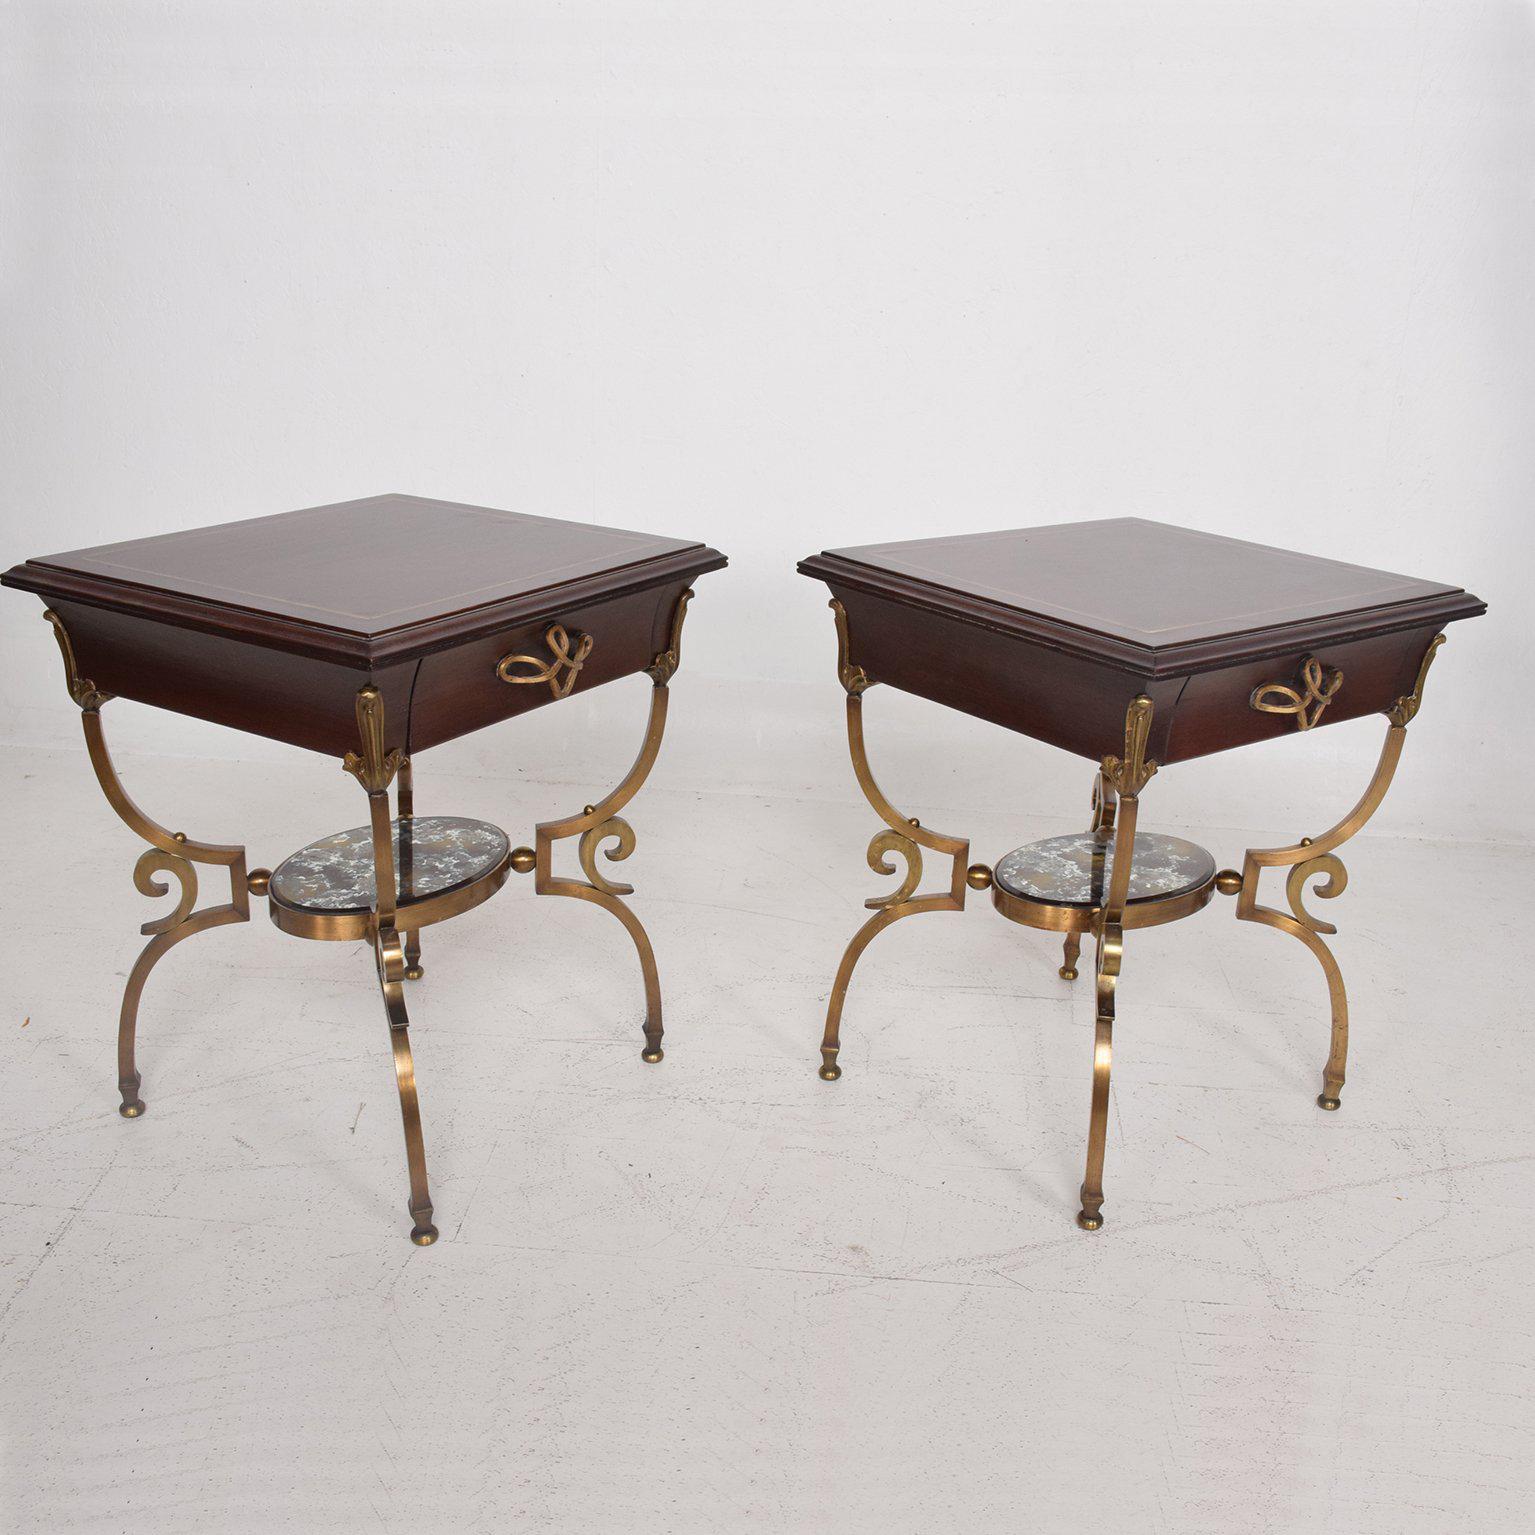 For your consideration a vintage pair of side tables or nightstands attributed to Arturo Pani.
Solid bronze legs/frame construction. Sculptural shape with eglomized oval mirror in the centre. The top has an original glass to protect the top.
The